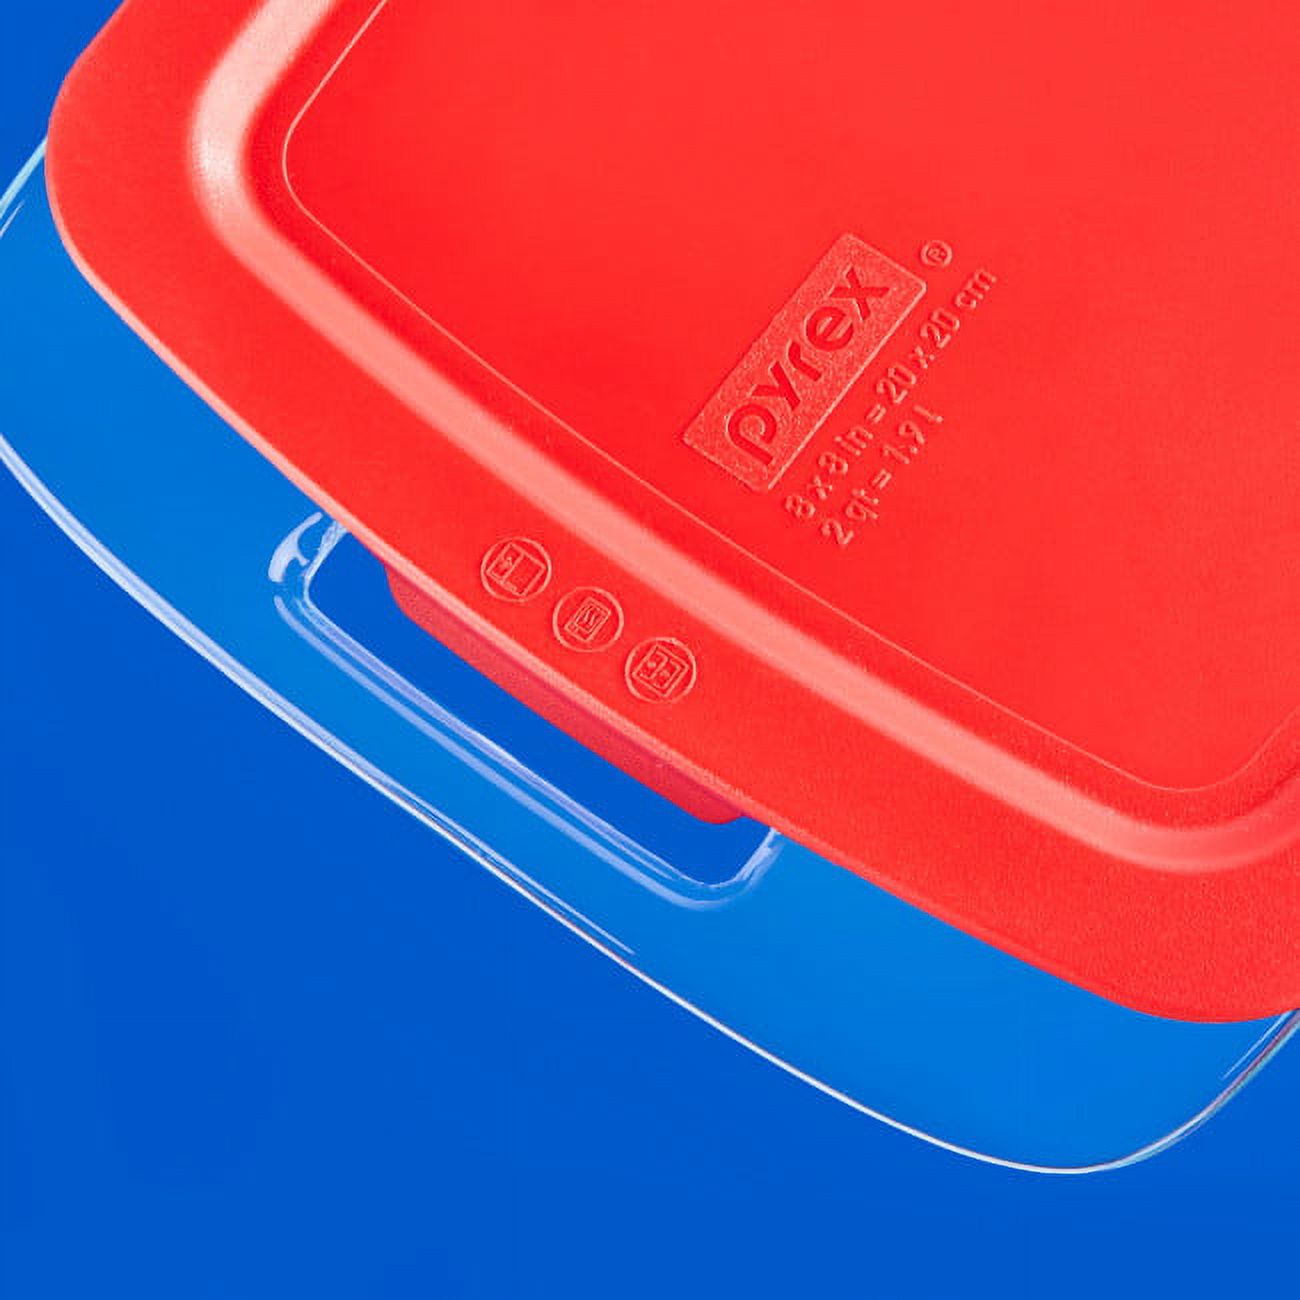 Pyrex Easy Grab 8" Square Glass Baking Dish with Red Lid - image 4 of 9